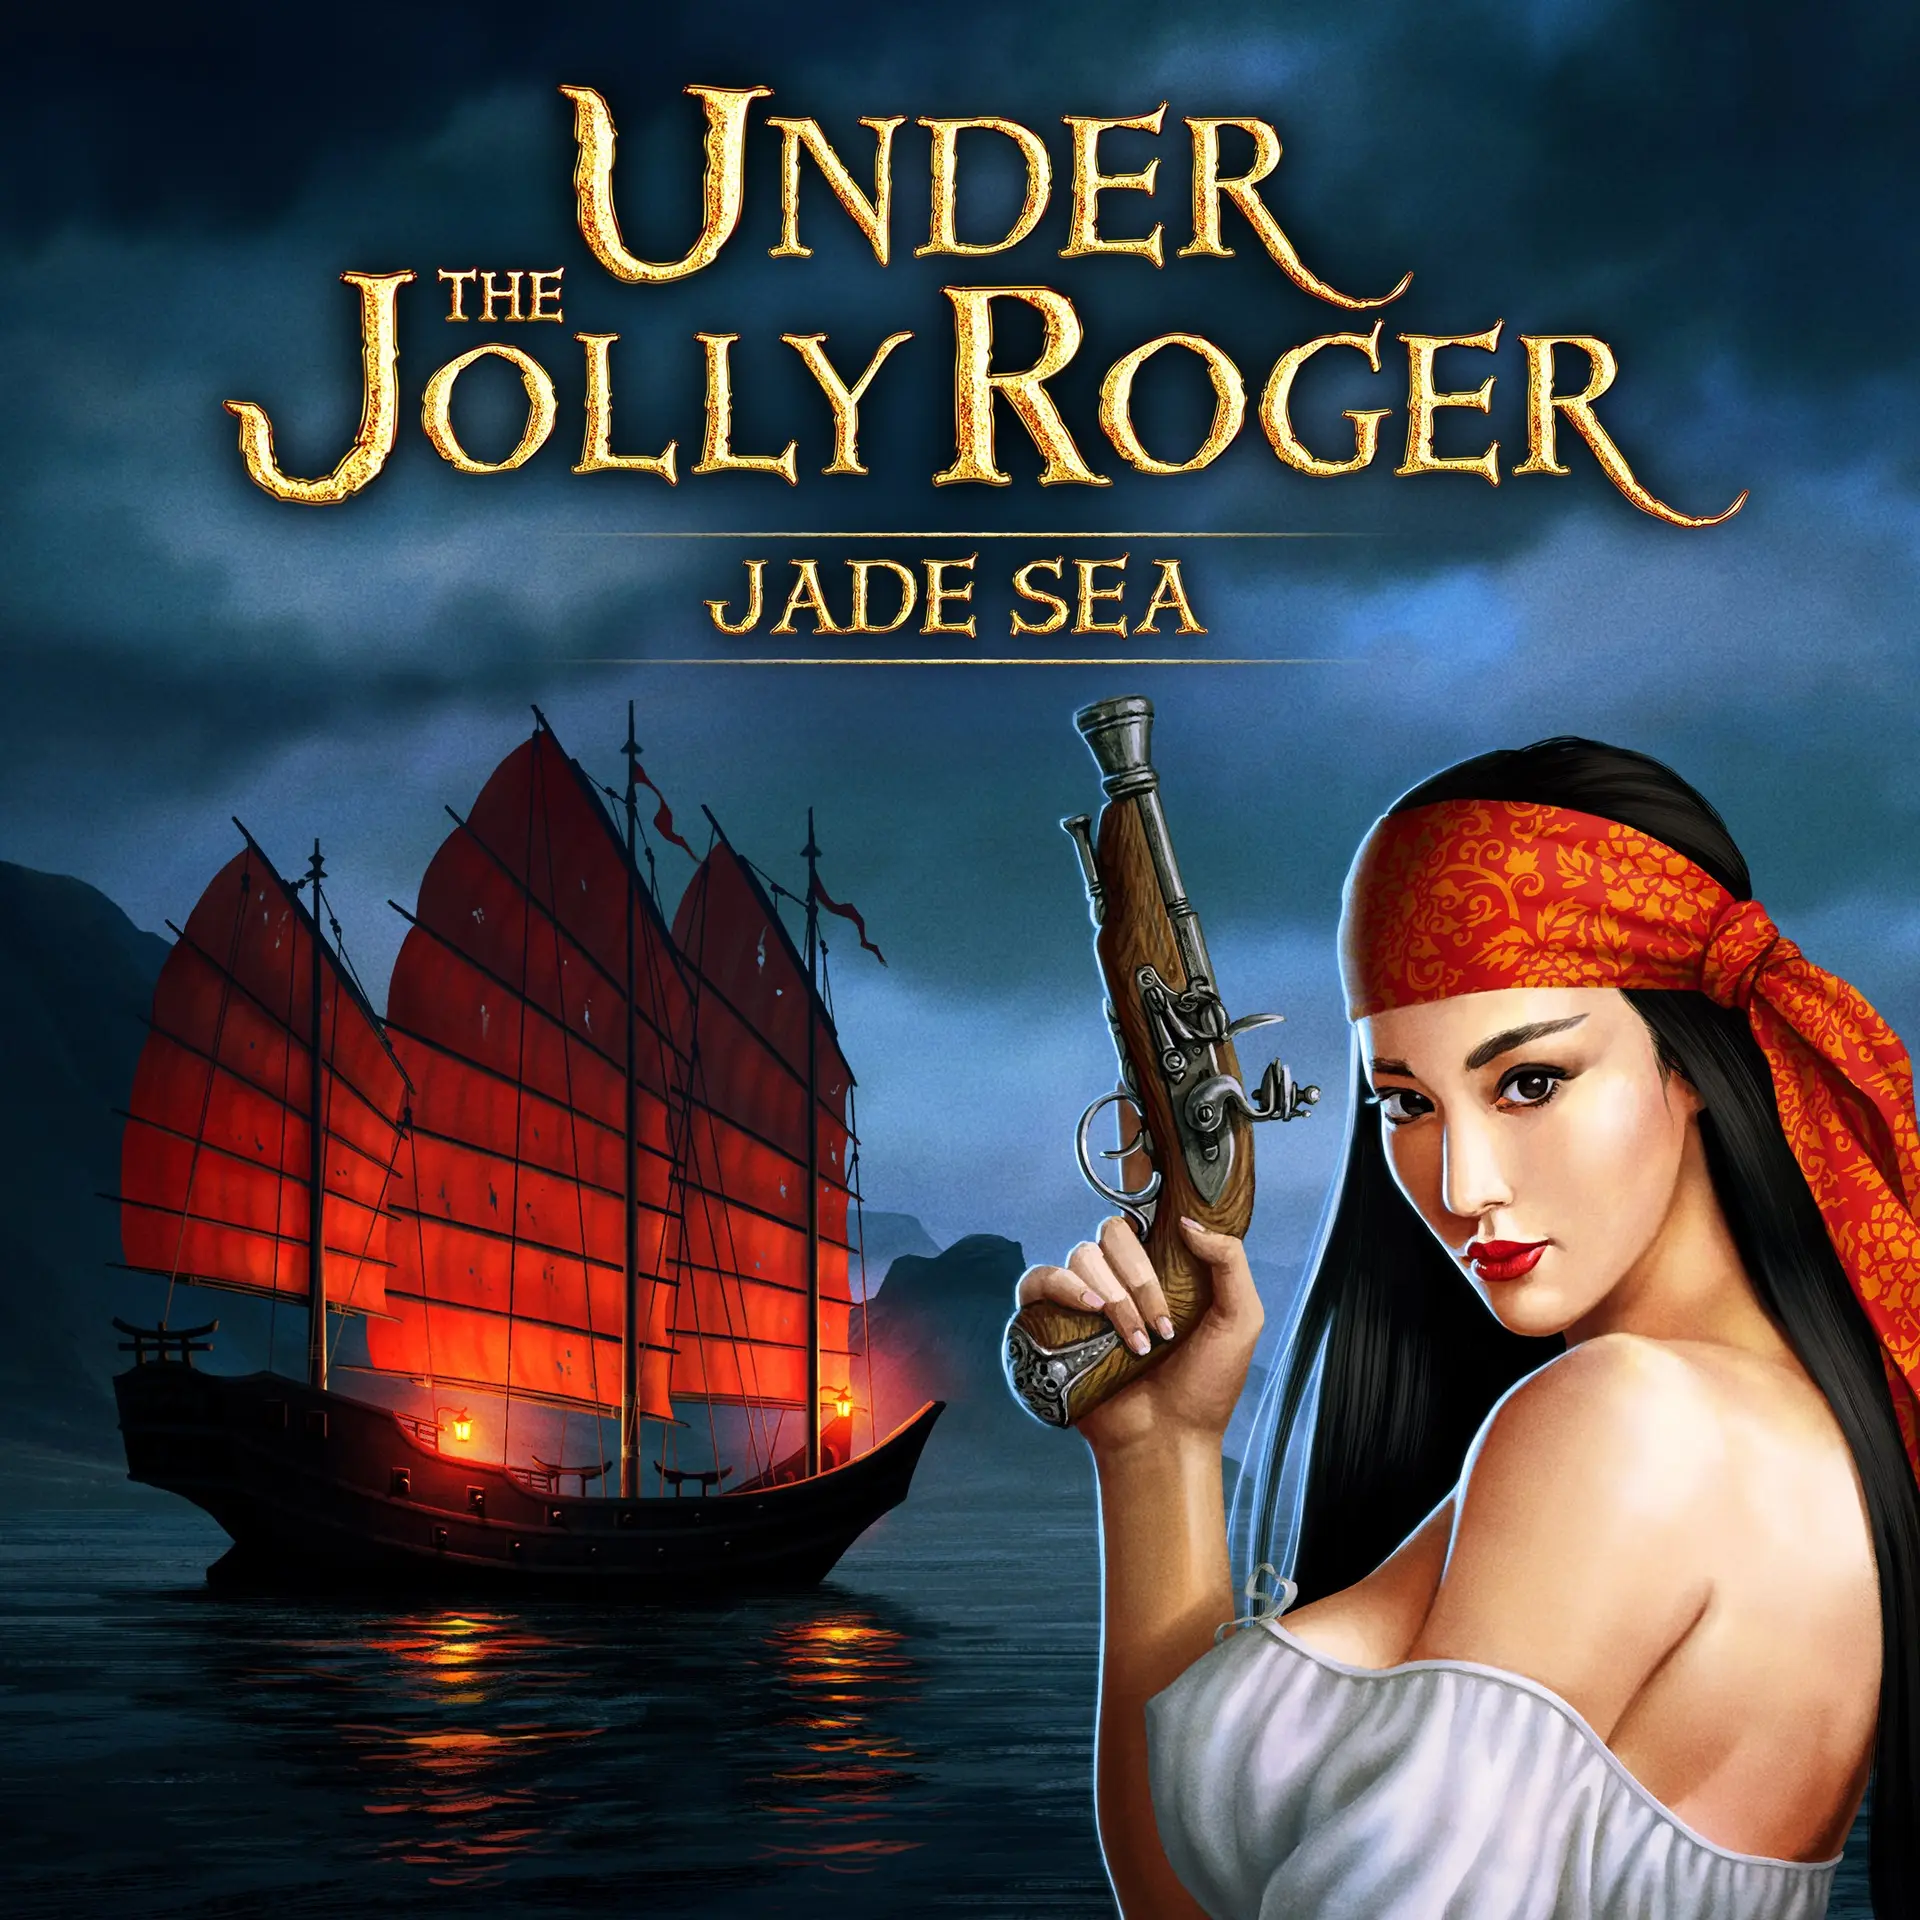 Under the Jolly Roger - Jade Sea (Xbox Games BR)